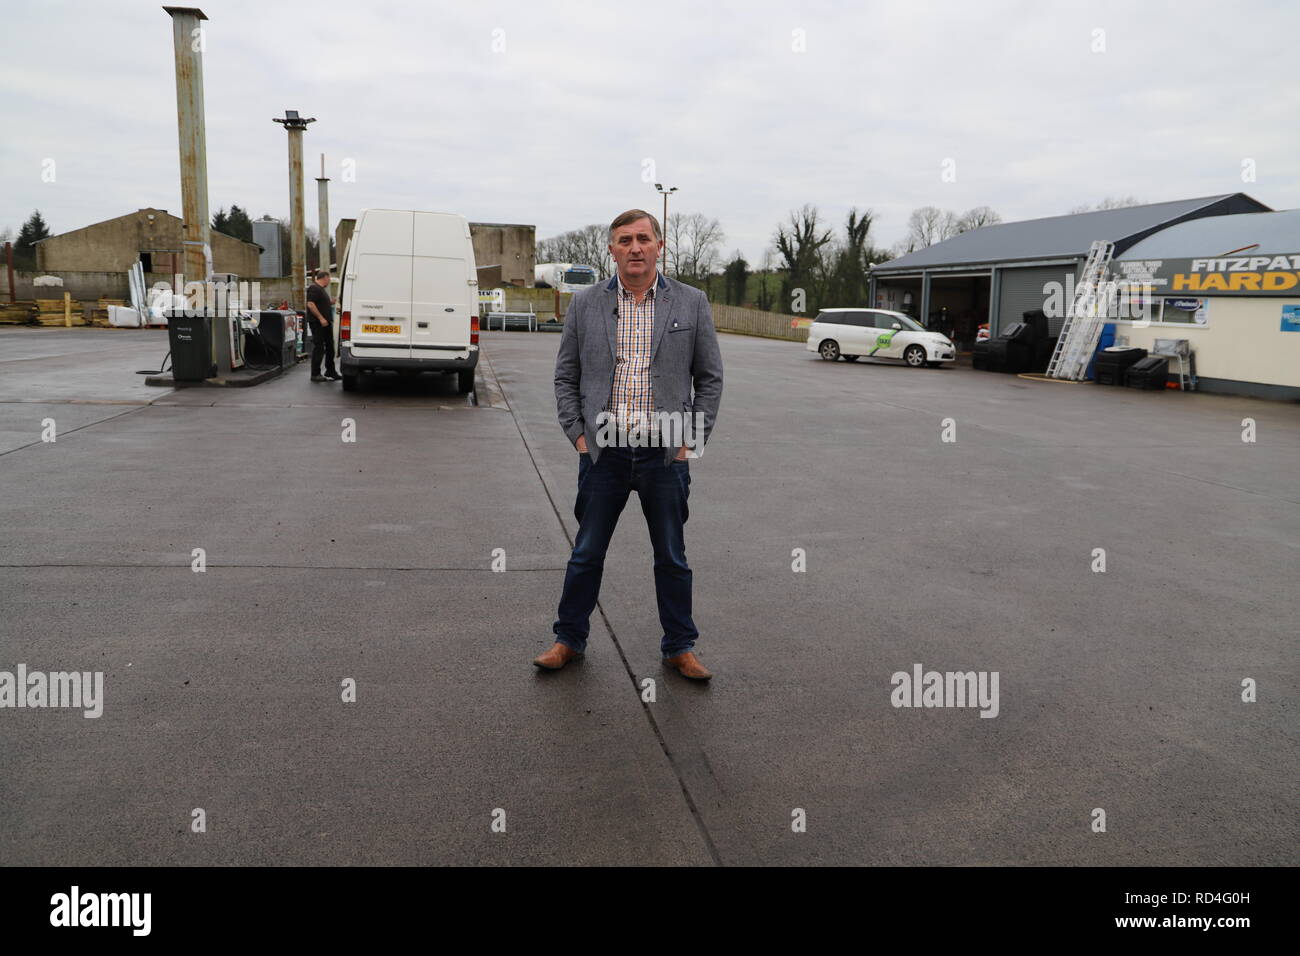 Dublin. 17th Jan, 2019. Photo taken on Jan. 10, 2019 shows local businessman Eamon Fitzpatrick standing between his fuel station (L) and hardware store (R), which are separated by the Ireland-UK border, in Drummully Polyp of Clones, Ireland. TO GO WITH feature:Border residents waiting in confusion for Brexit results Credit: Xinhua/Alamy Live News Stock Photo